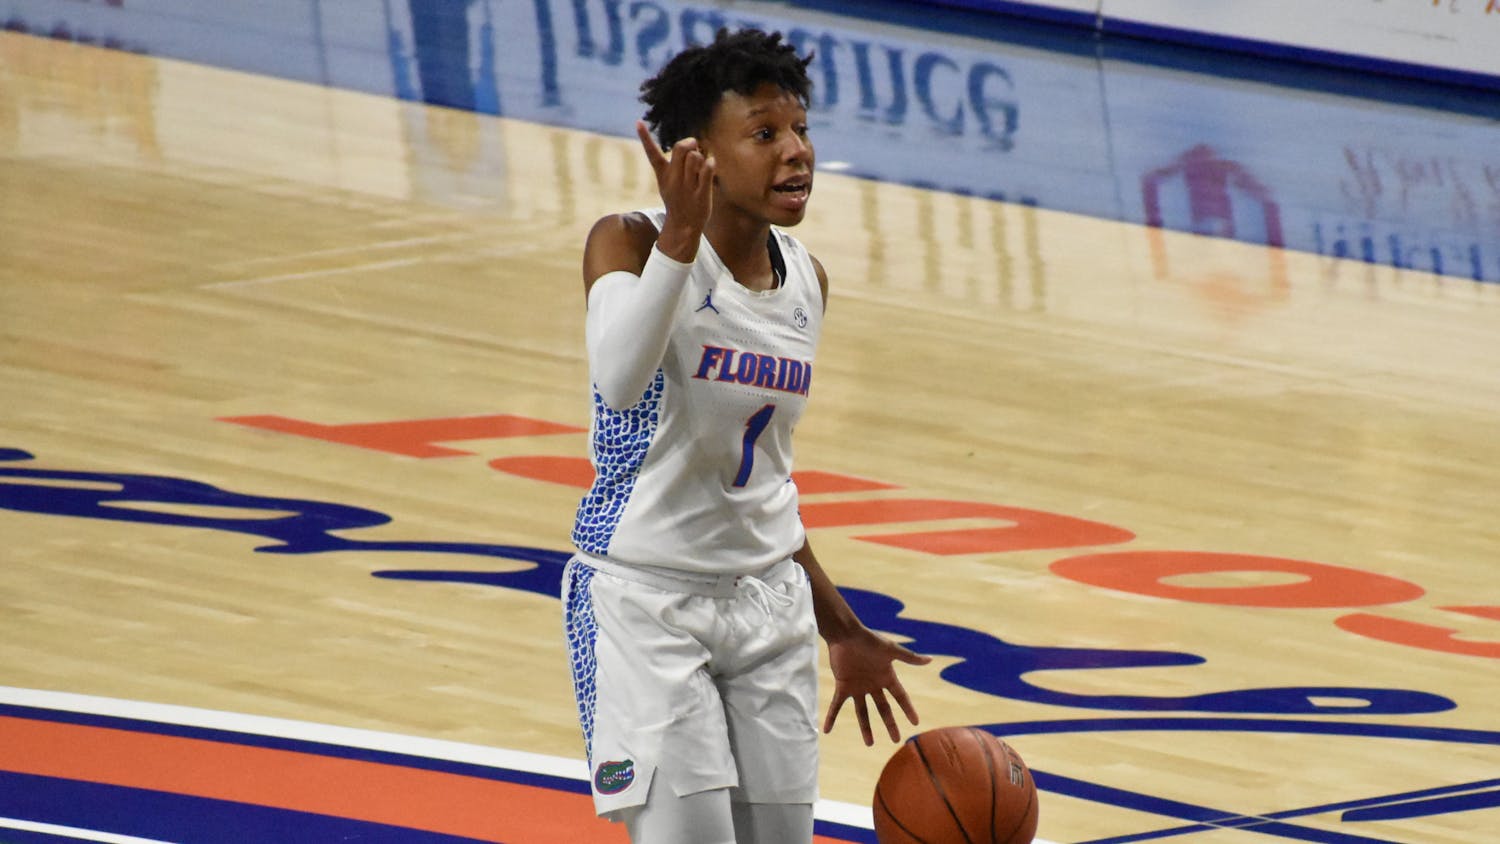 Guard Kiara Smith led the Gators to victory over Auburn in the SEC Tournament game Wednesday. The Gators will now face No.5-seed Kentucky Thursday.